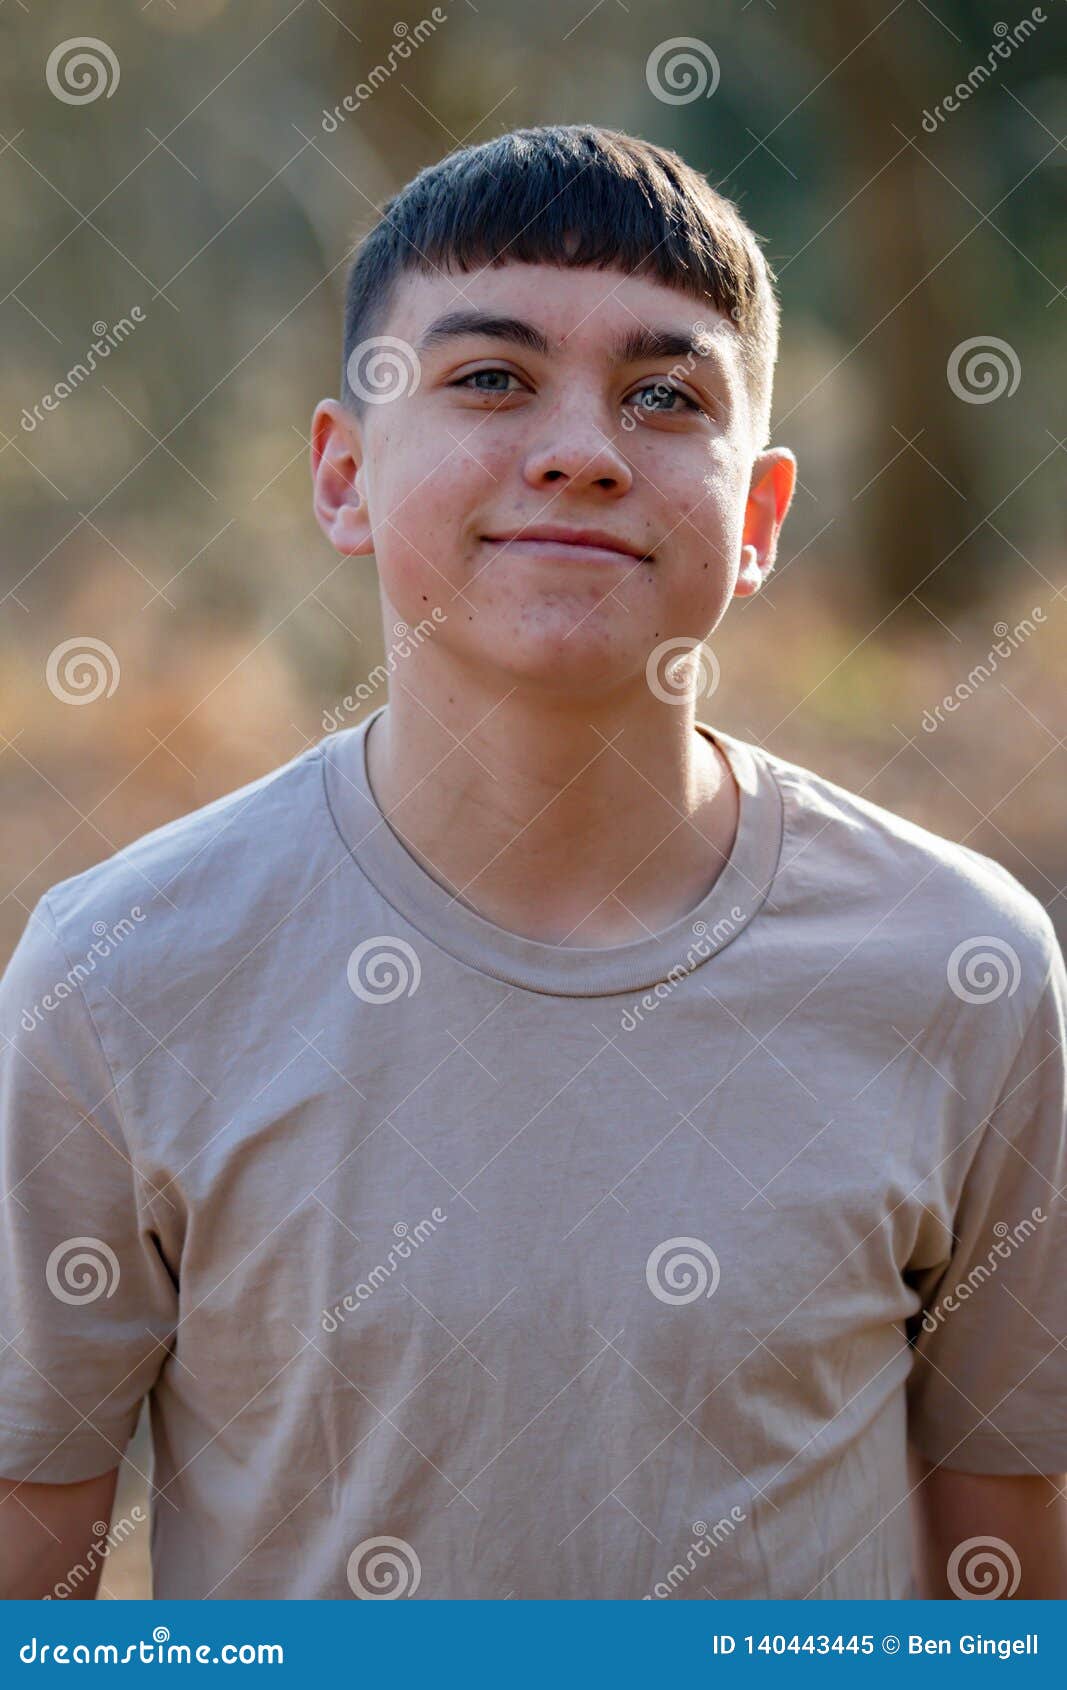 Teenage Boy Outside on a Bright Spring Day Stock Image - Image of happy ...